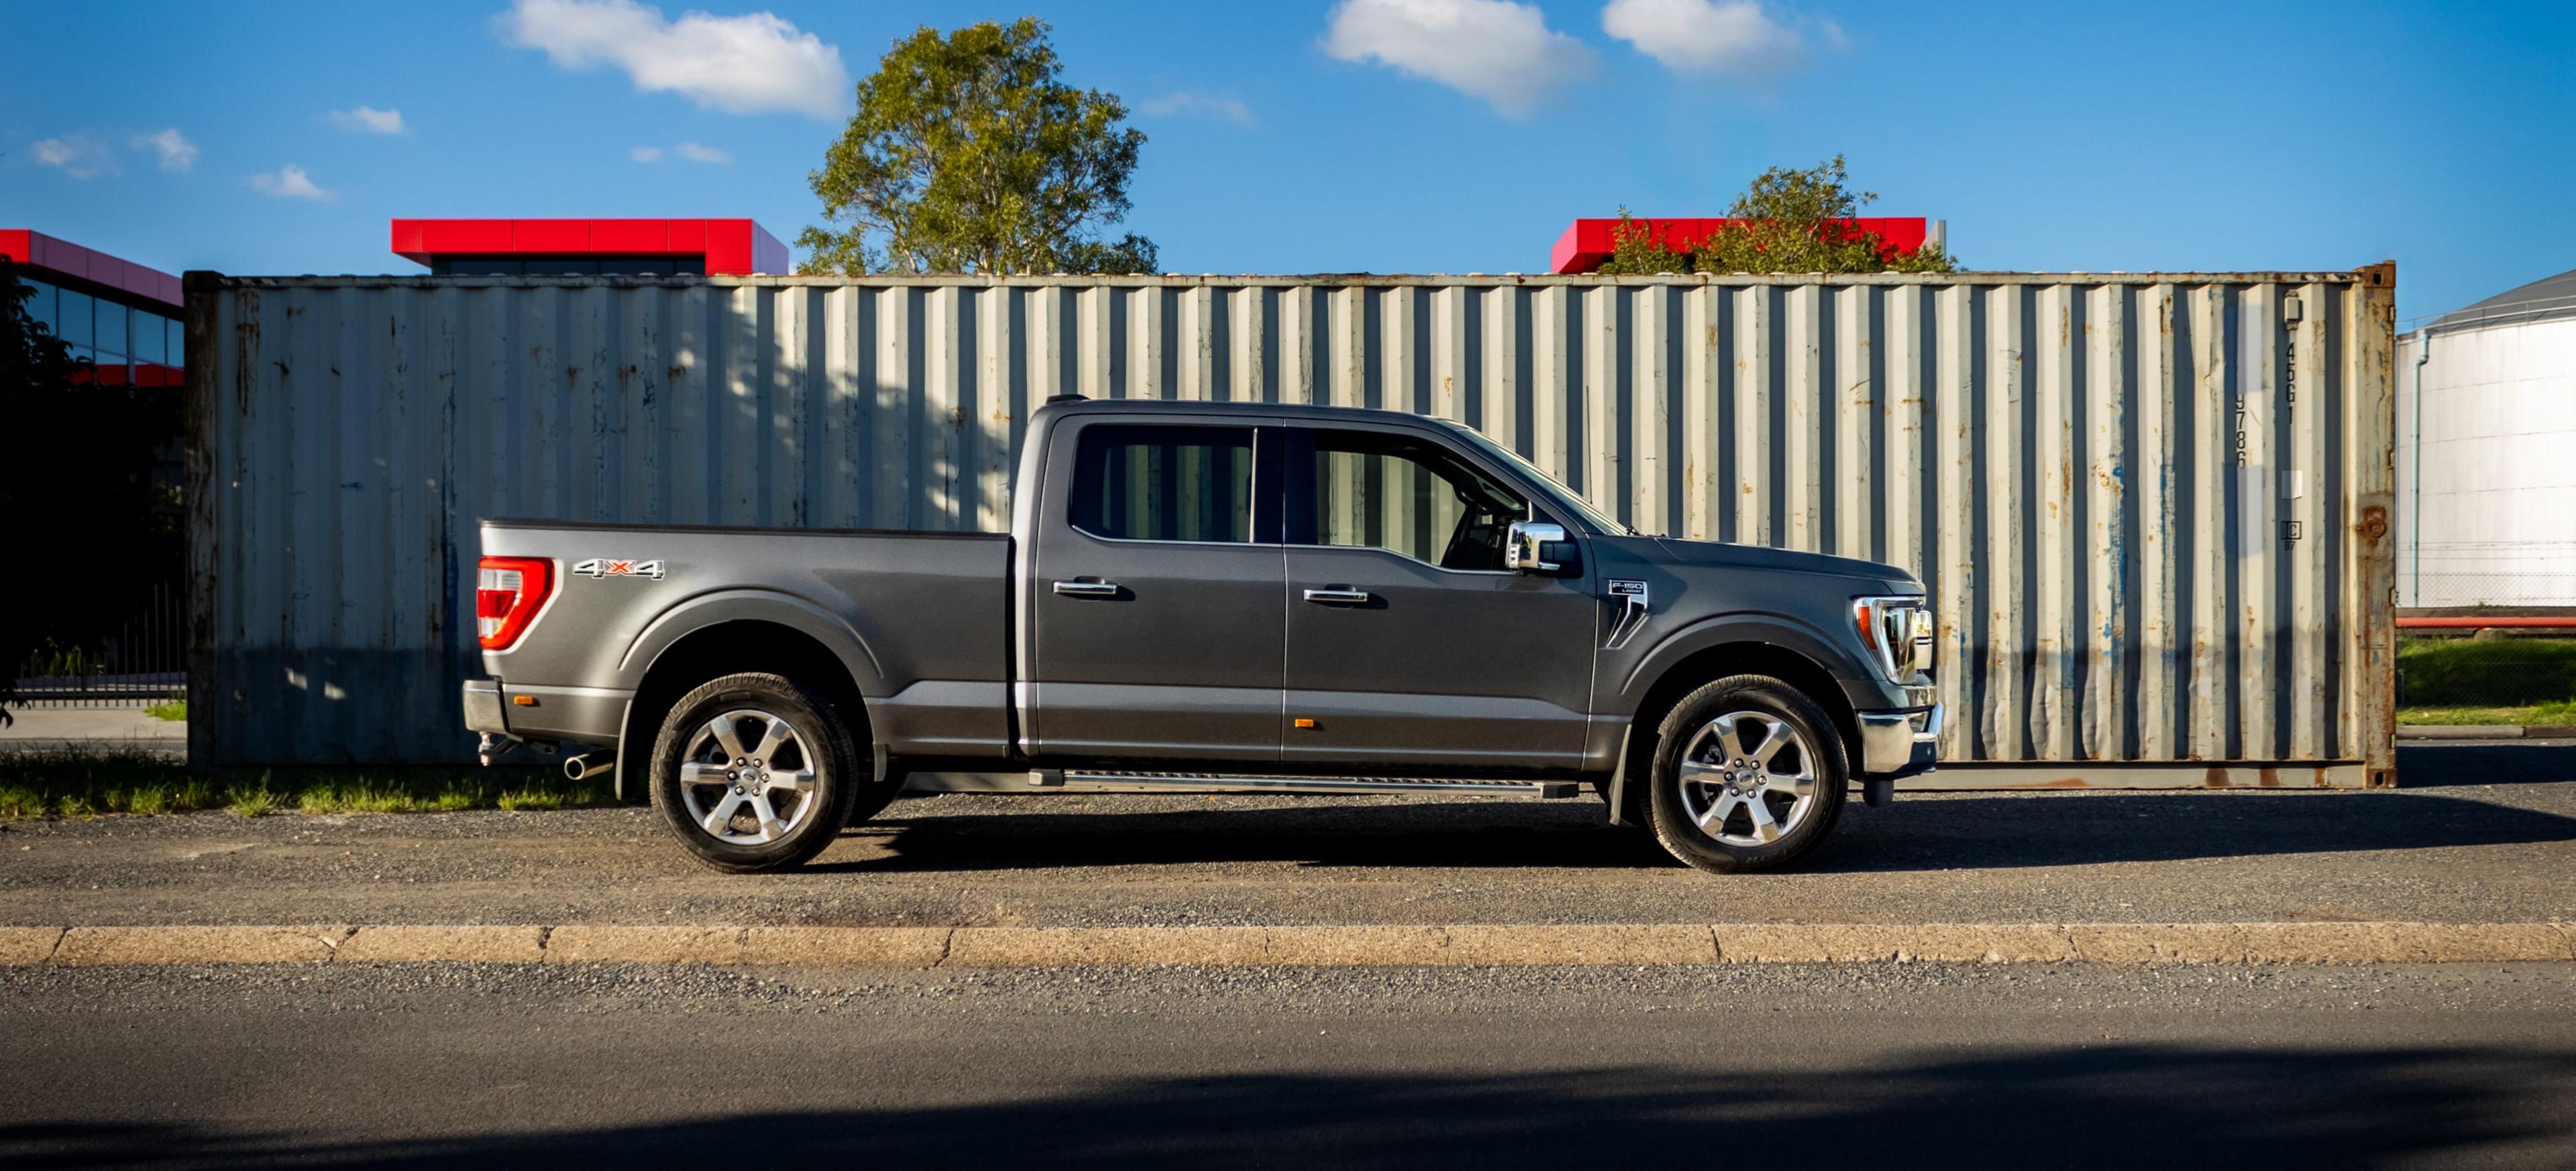 Three Things We Love About the 2023 Ford F-150 banner